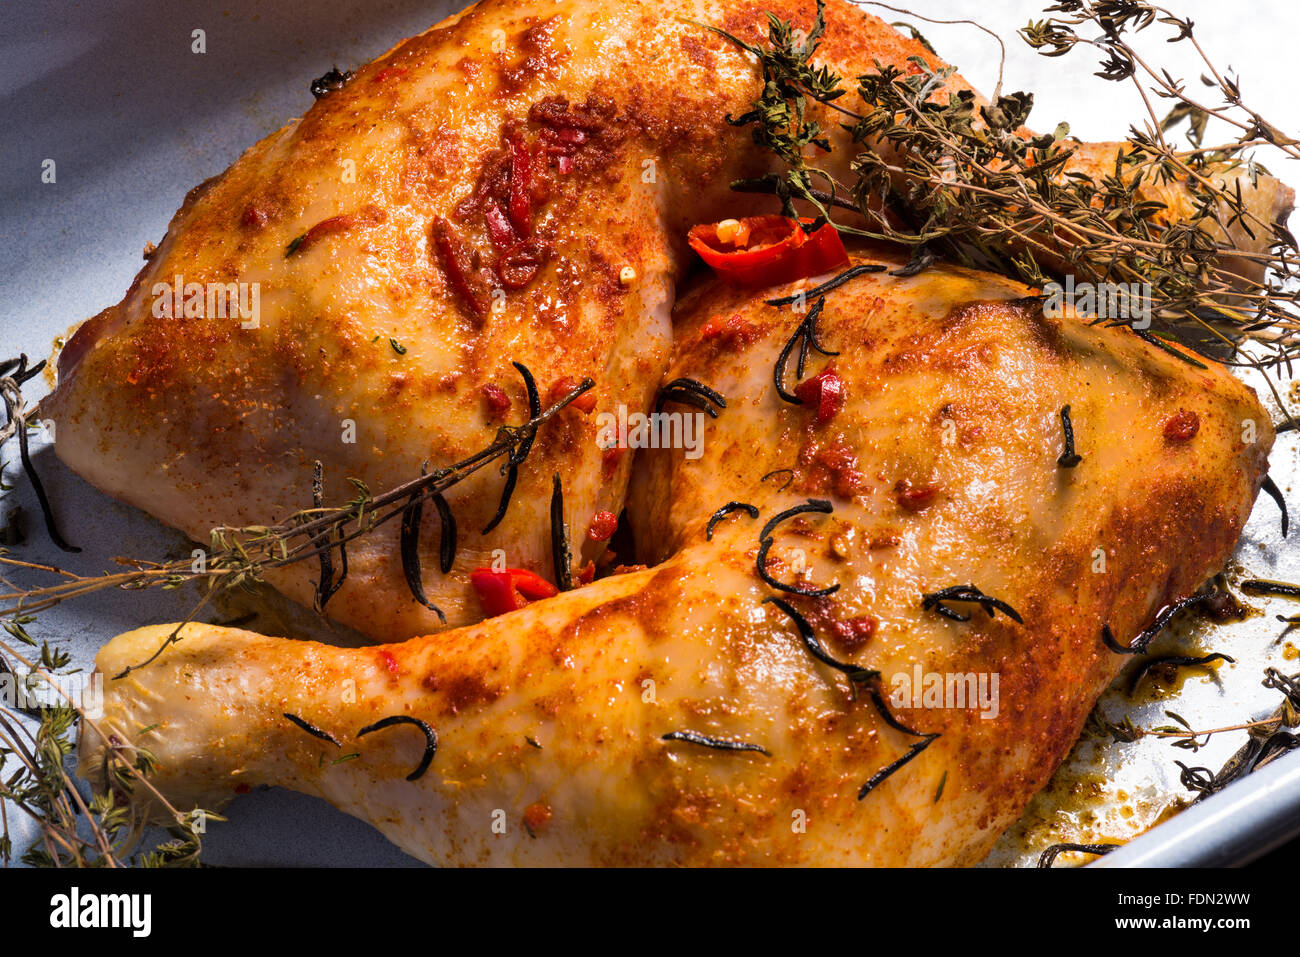 Paprika chicken chili pepper chicken legs chicken legs crispy spiced spices Light dishes healthy lifestyle trend trendy Trendy m Stock Photo